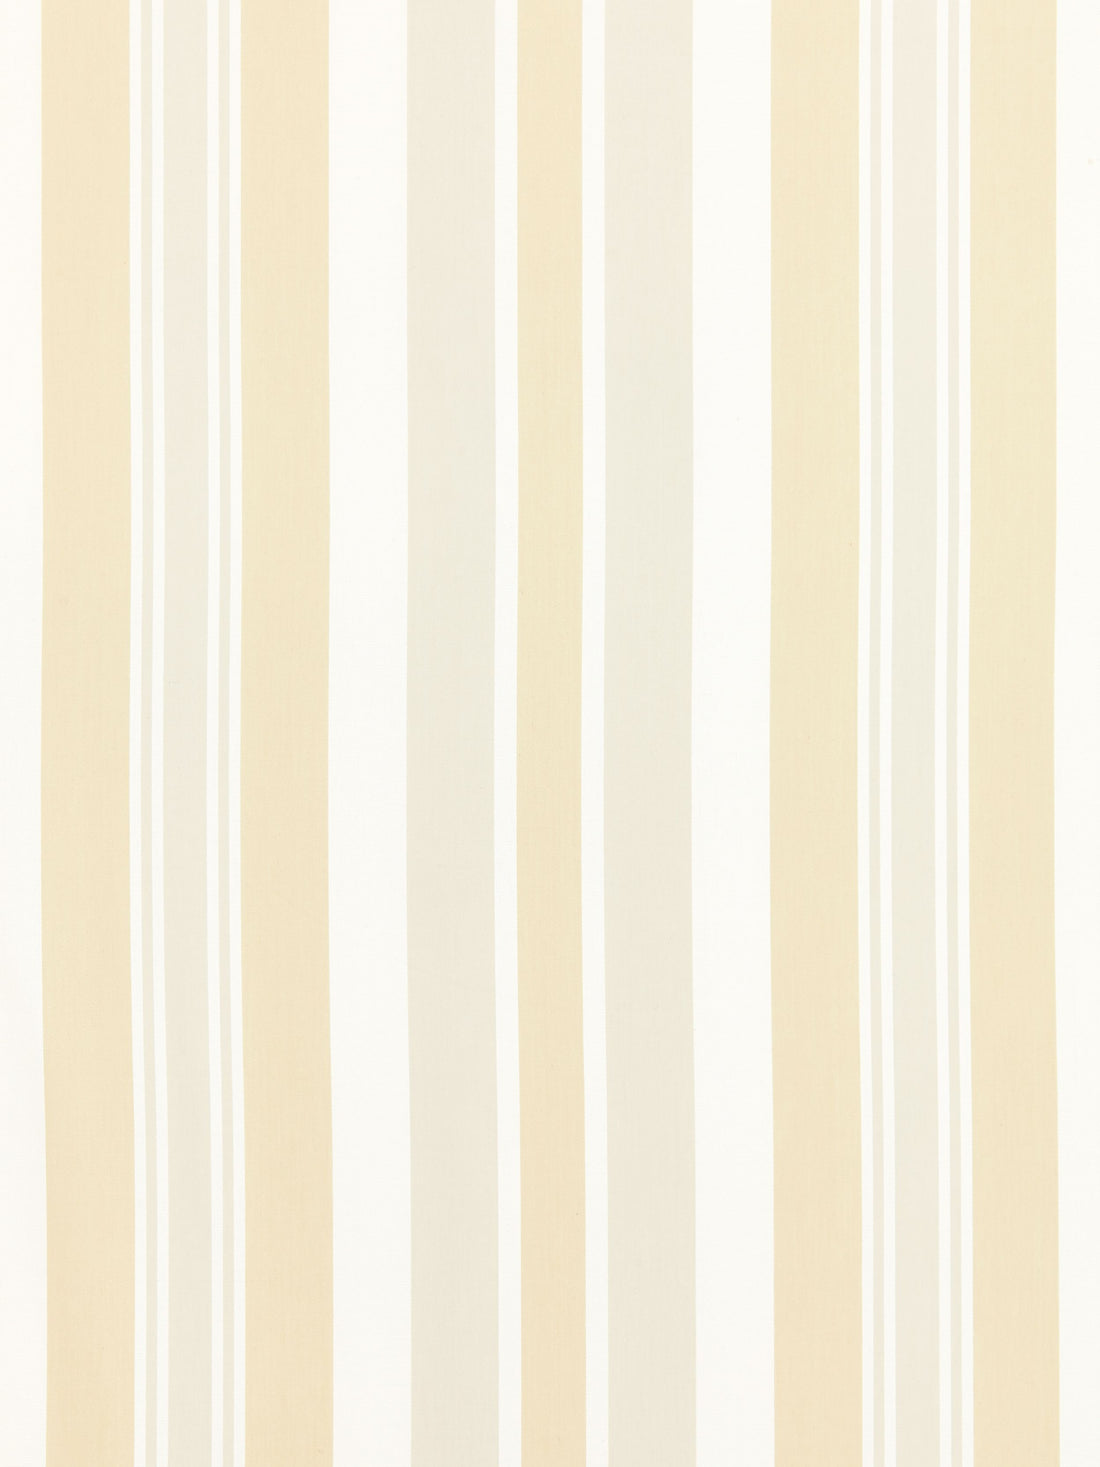 Mayfair Cotton Stripe fabric in pebble color - pattern number SC 000327112 - by Scalamandre in the Scalamandre Fabrics Book 1 collection